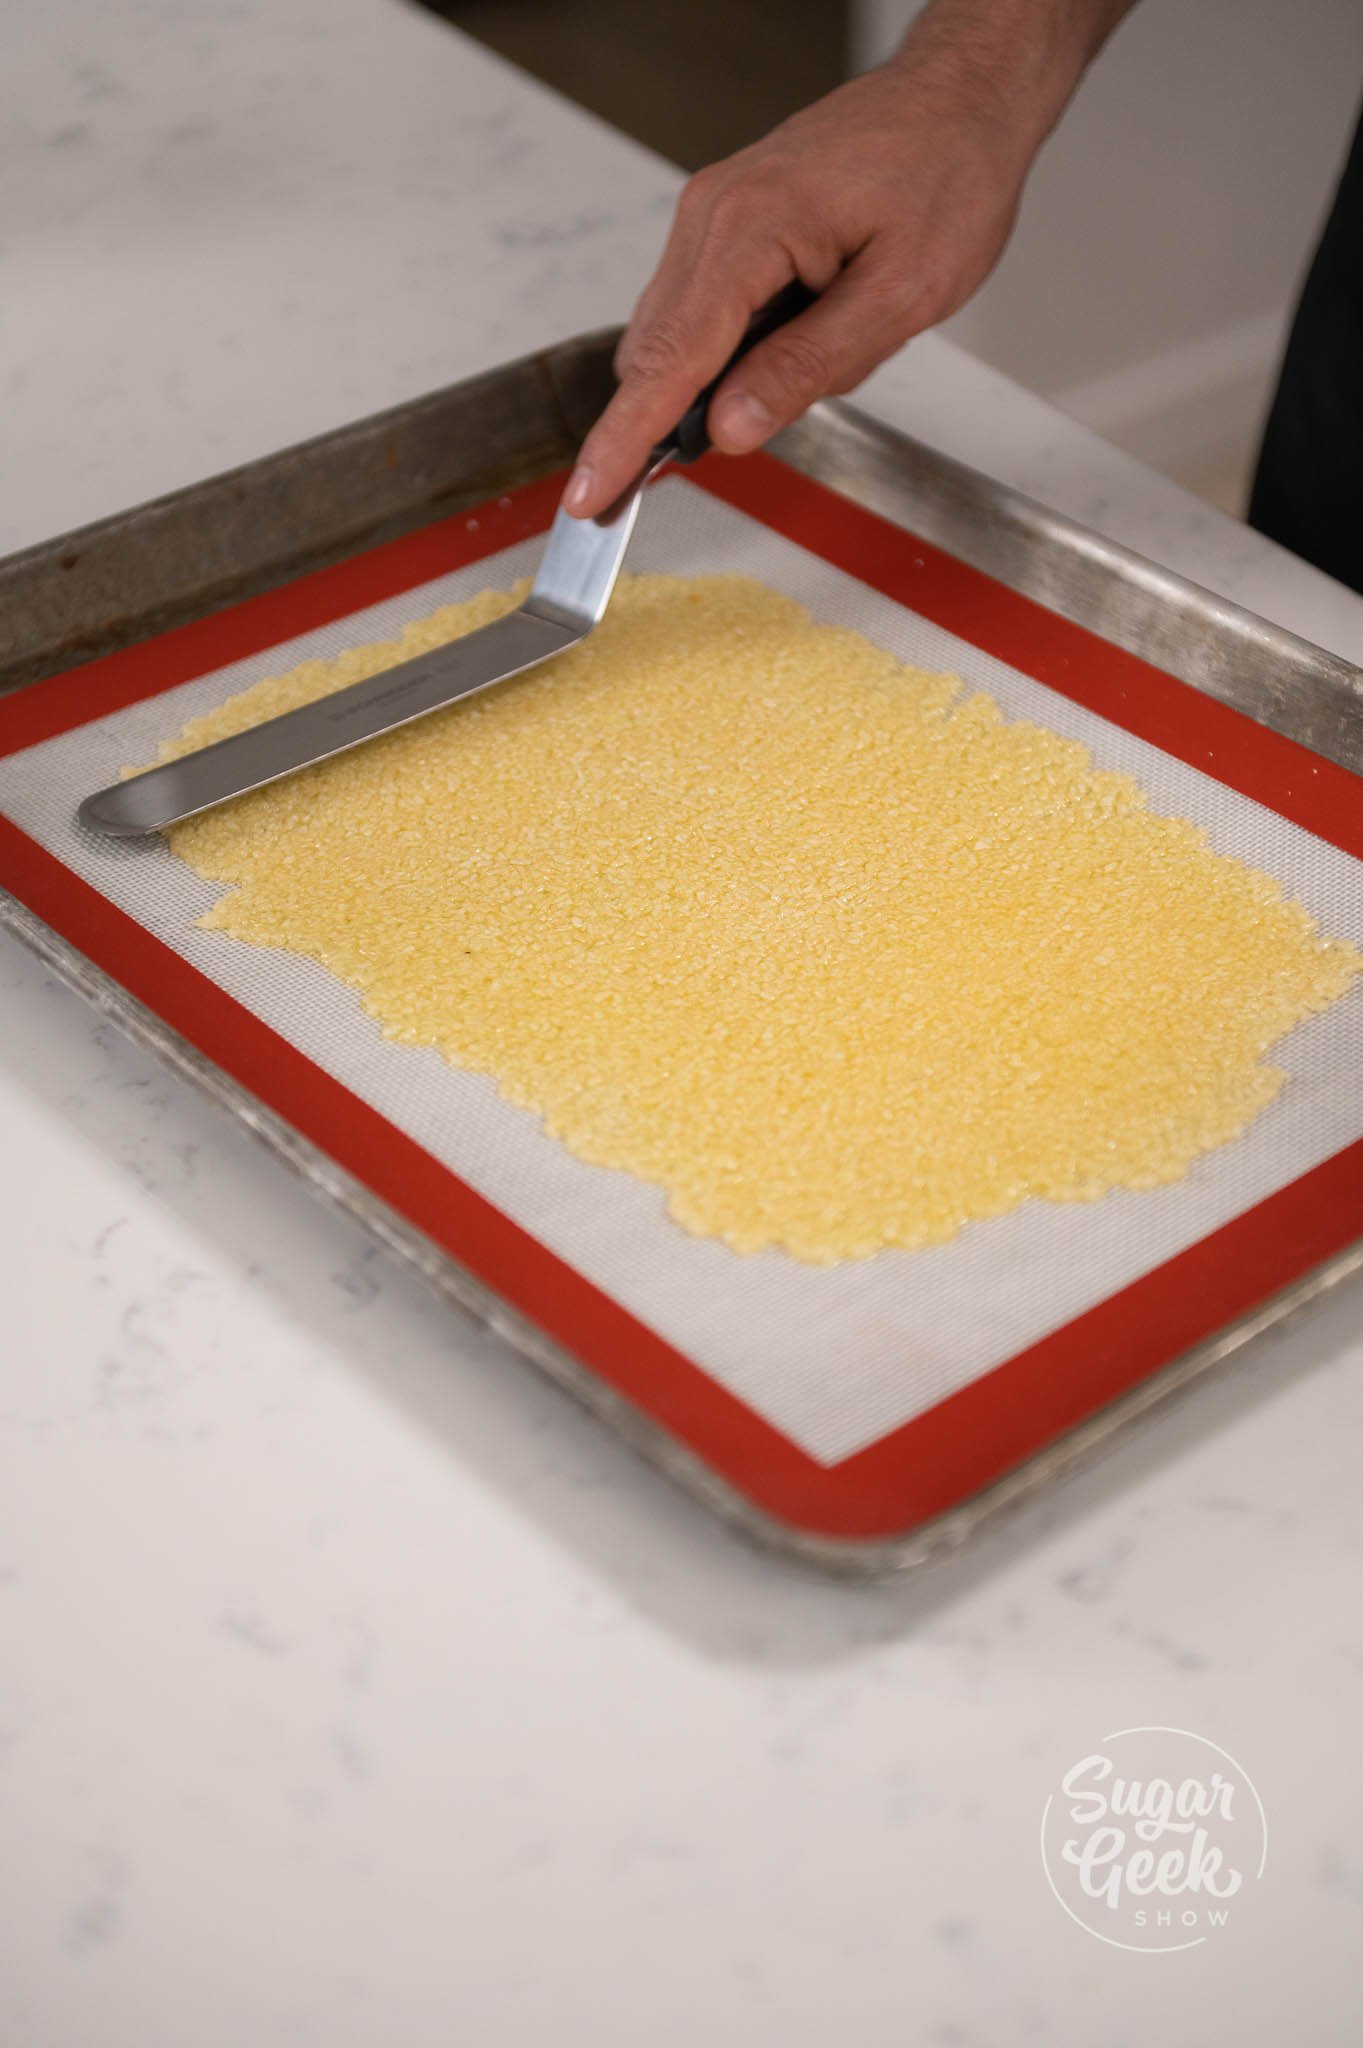 hand using spatula to spread nougatine on tray.